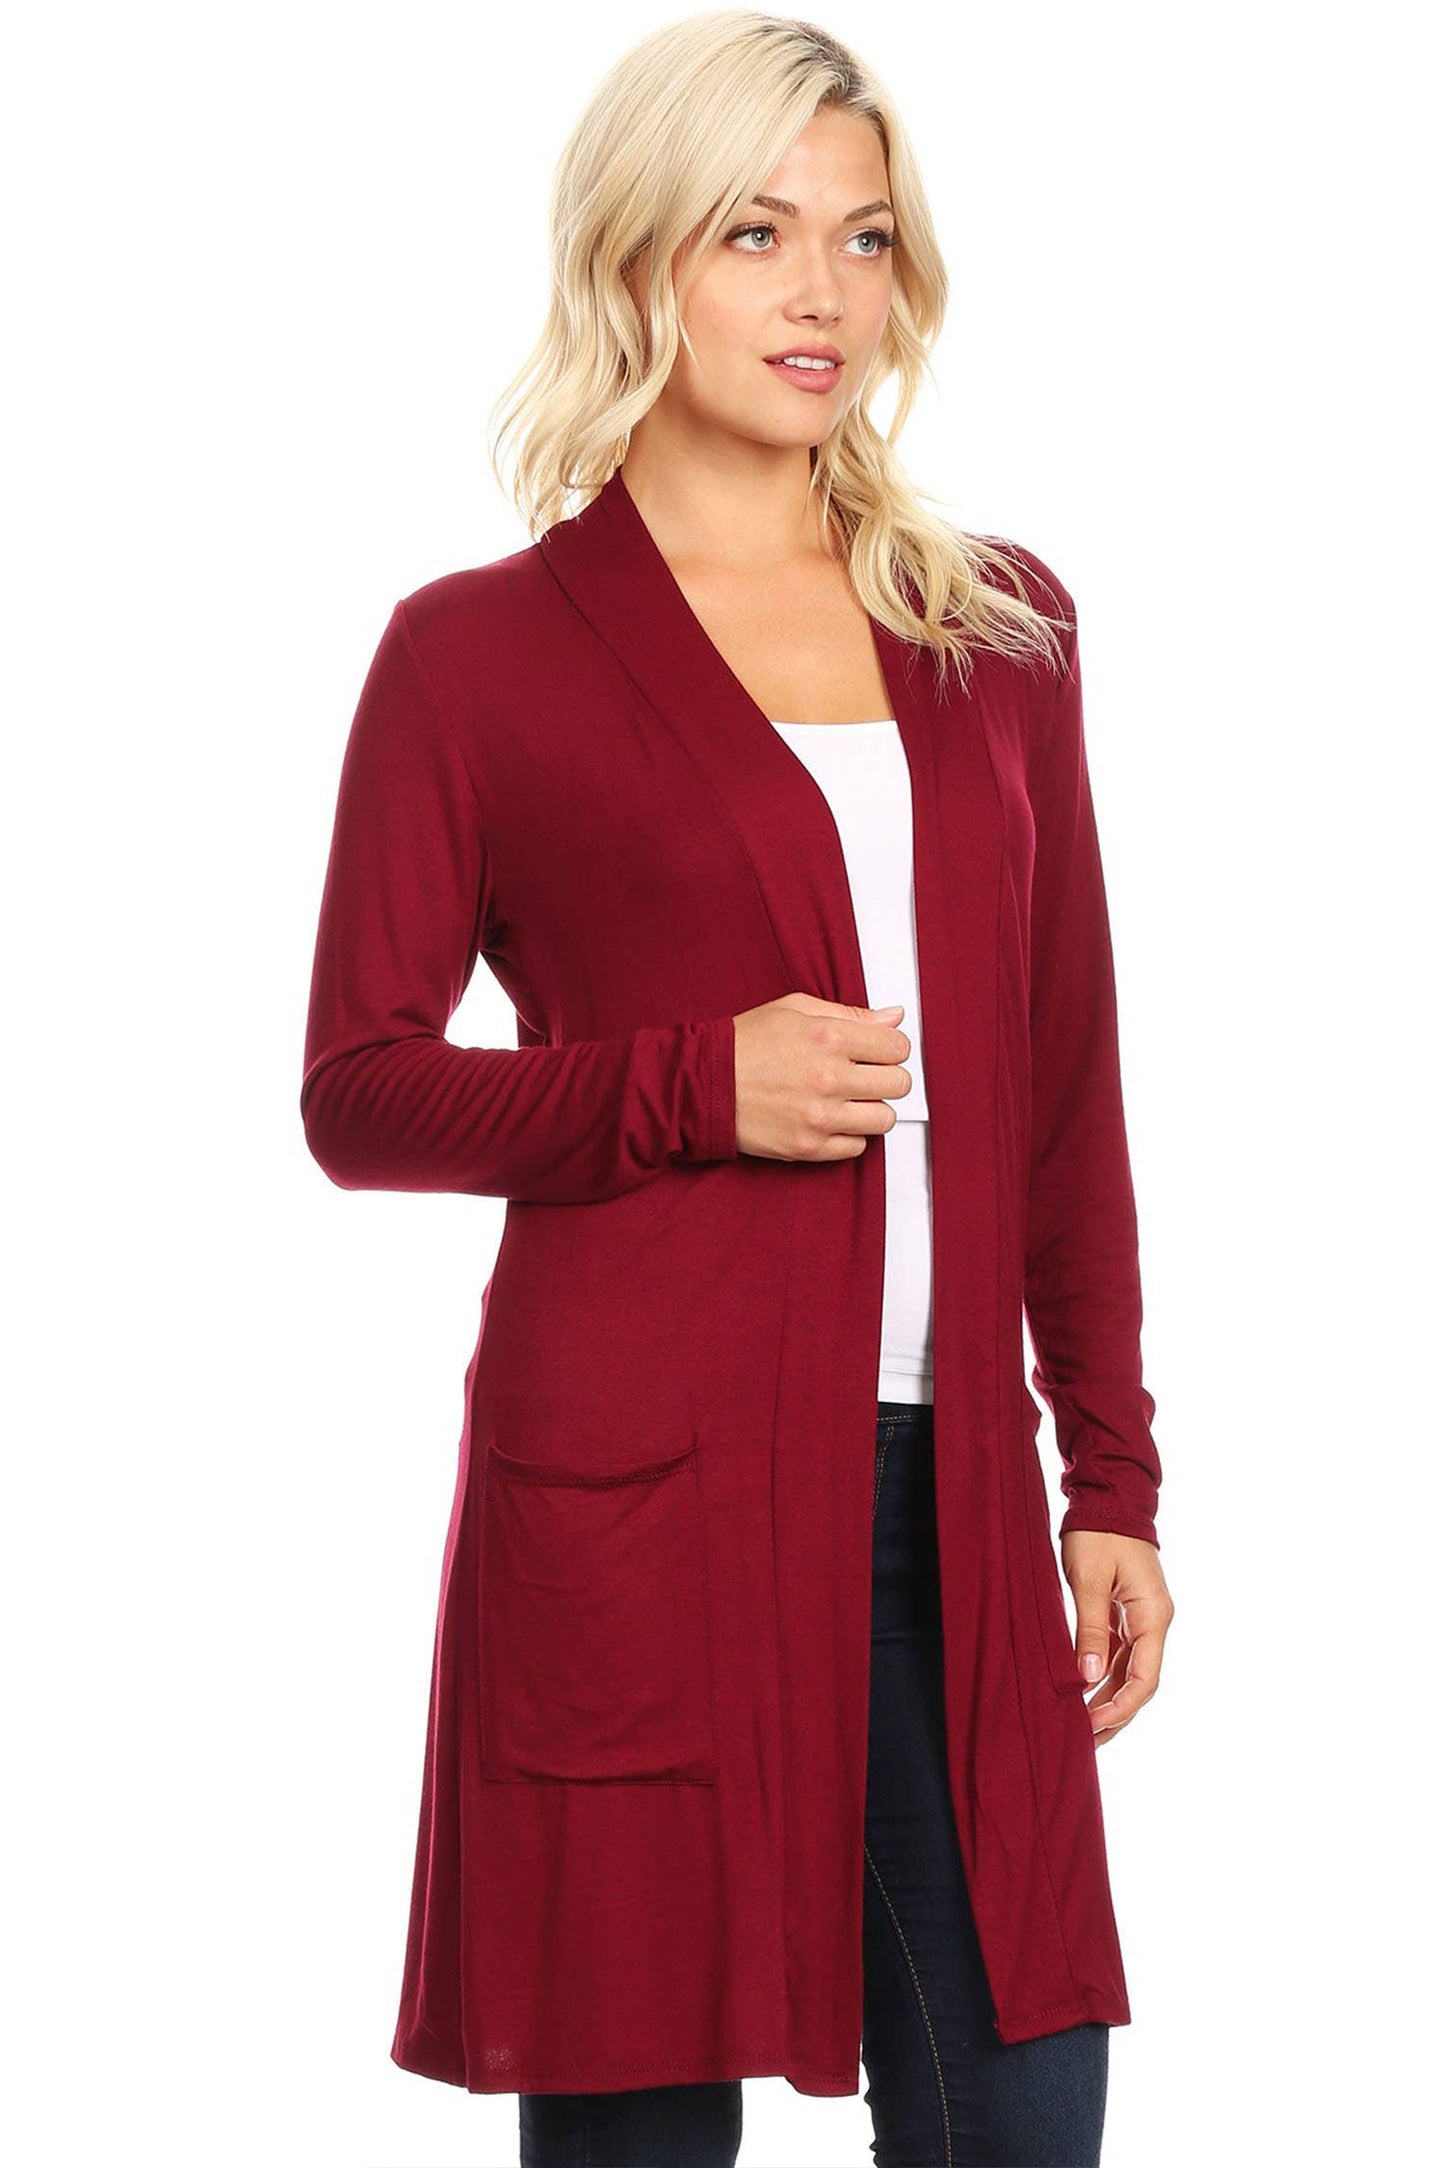 Women's Long Sleeves Side Pockets Solid Cardigan (Open Pack): Large / Plum